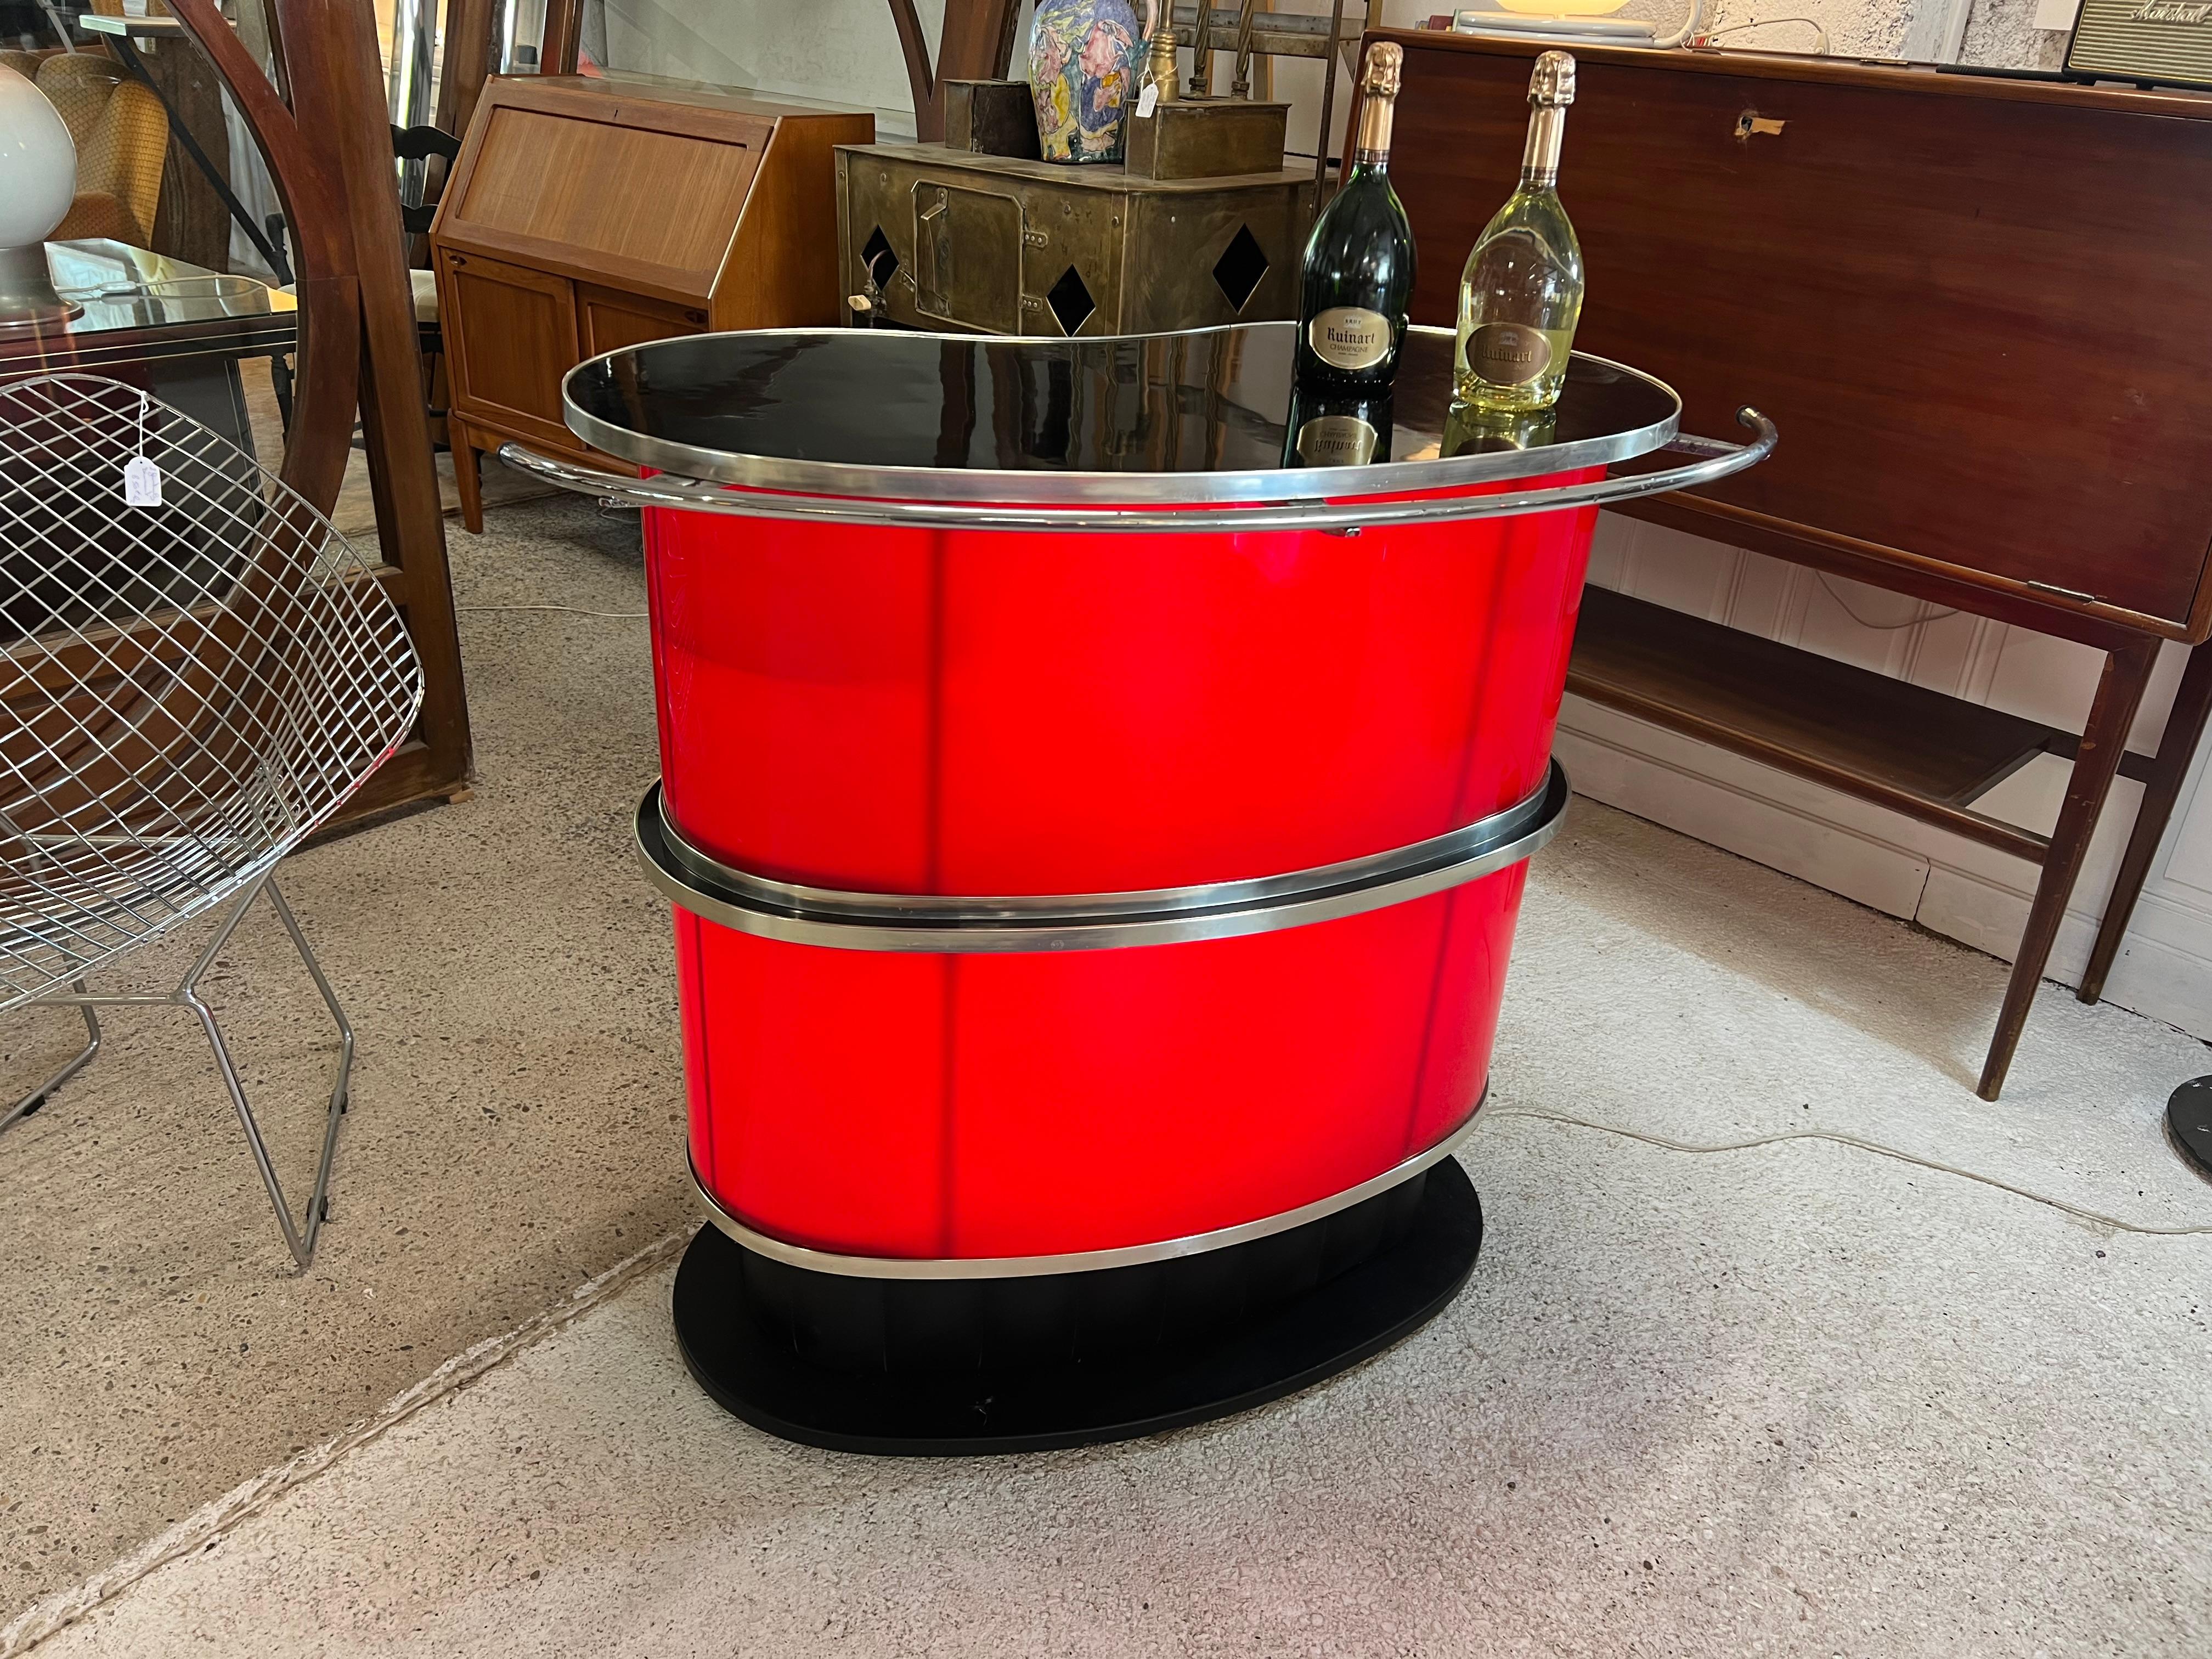 magnificent cocktail bar from the 50s, rounded and bright
it is made up of 4 sliding doors in red plexi which diffuse the light
the top doors are designed for glasses with pivoting compartments, and the 2 bottom doors are designed for bottles
the